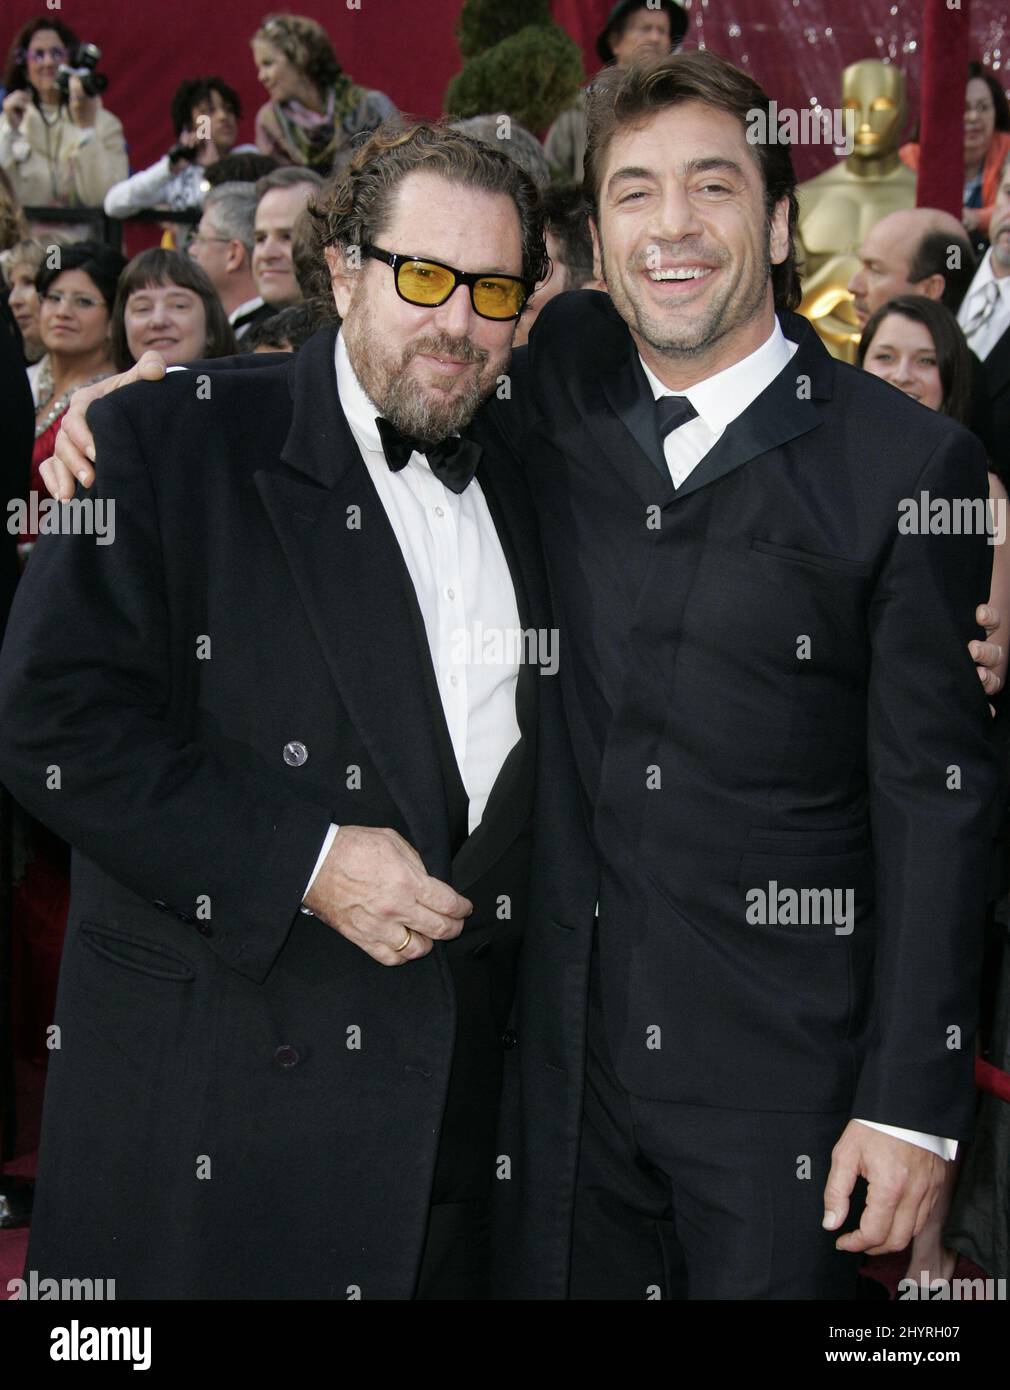 Julian Schnabel and Javier Bardem arrive at the 80th Annual Academy Awards (oscars) in Hollywood, California. Stock Photo